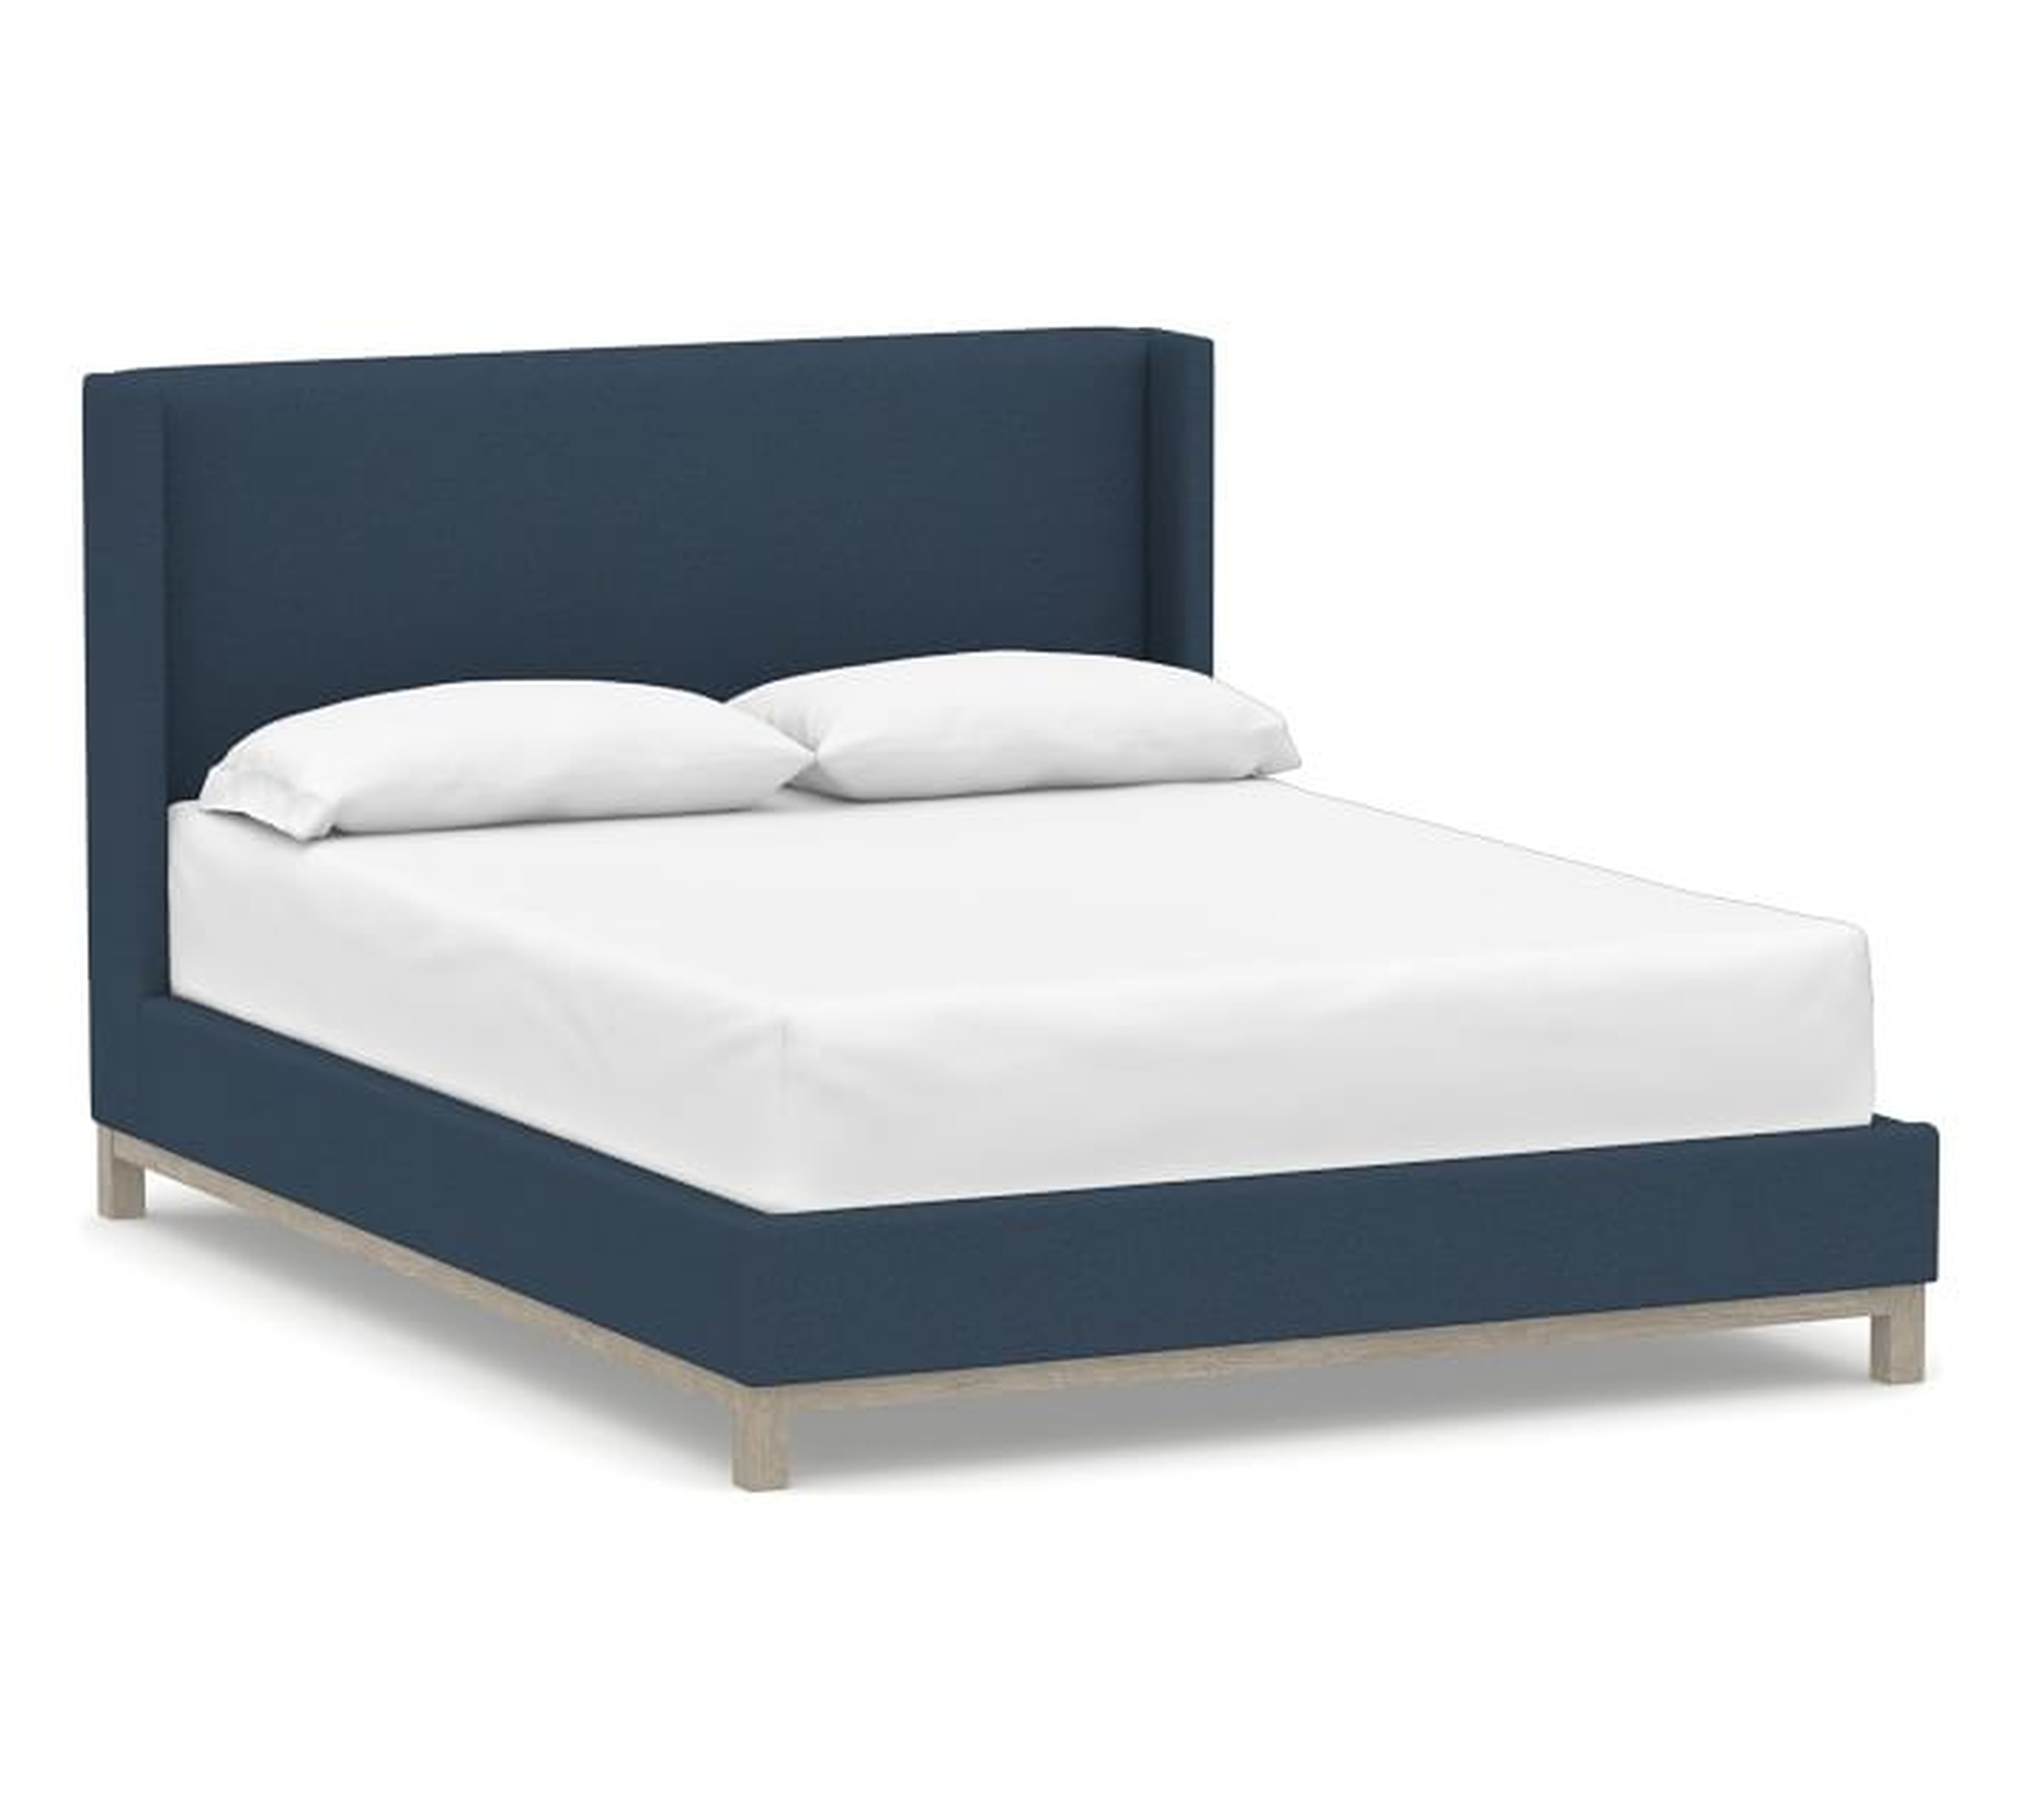 Jake Upholstered Bed with Gray Wash Frame, King, Brushed Crossweave Navy - Pottery Barn